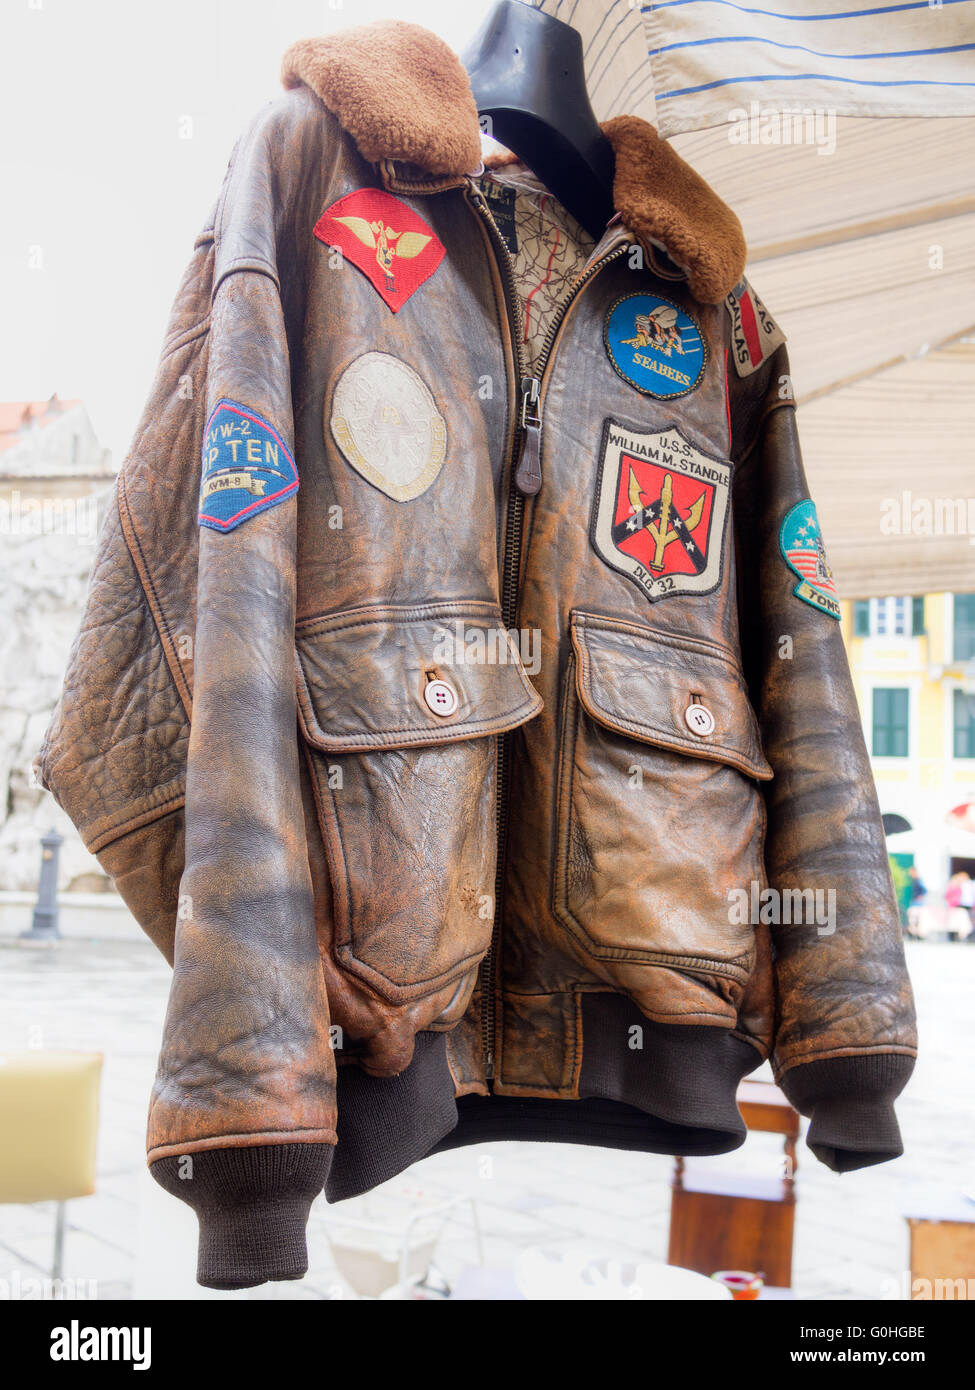 US USAF leather pilots jacket. For sale in market. Front view Stock Photo -  Alamy